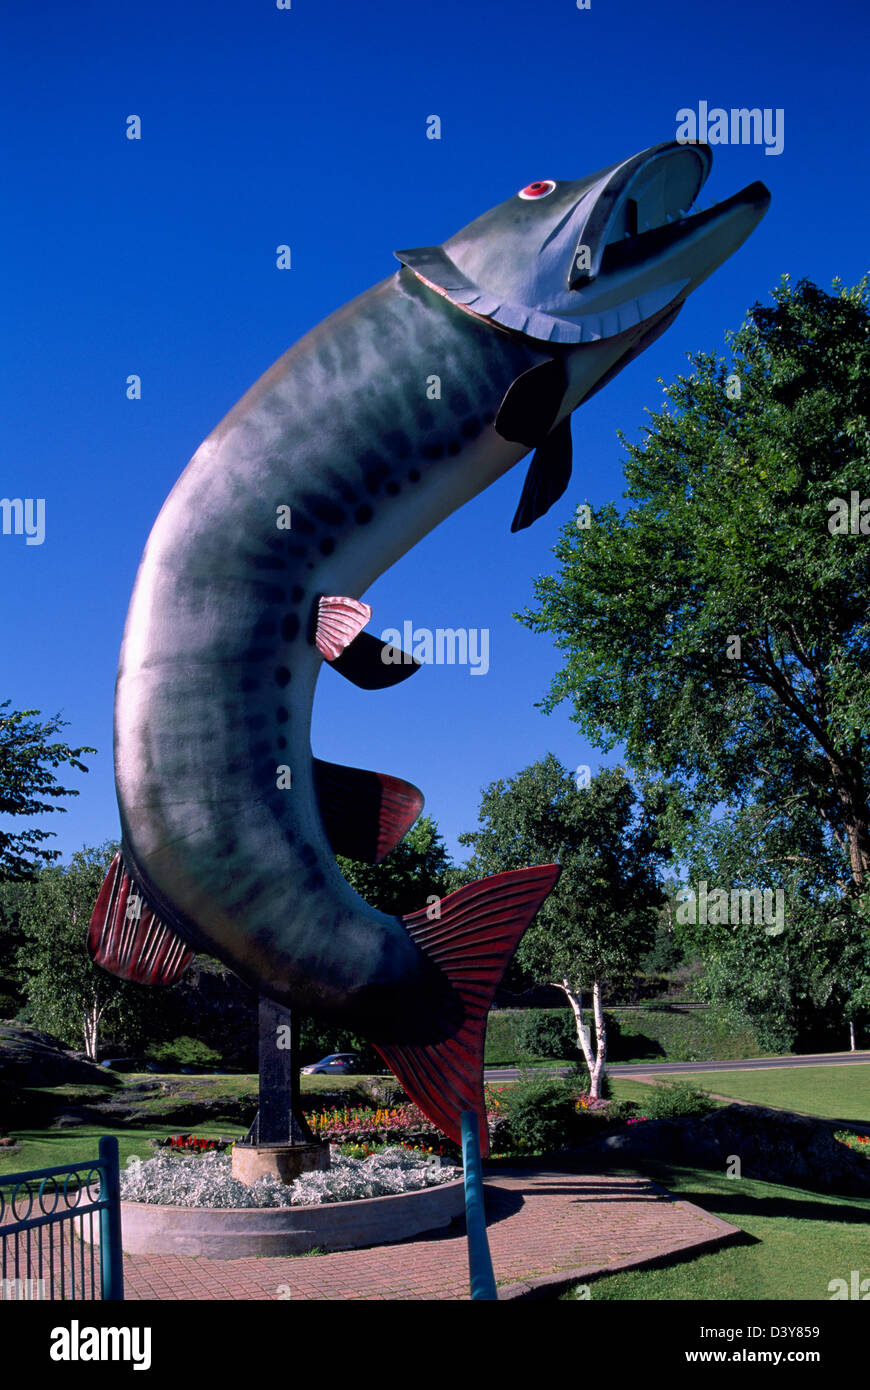 Husky the Muskie Statue, Roadside Attraction at McLeod Park, Lake of the Woods, Kenora, Ontario, Canada Stock Photo